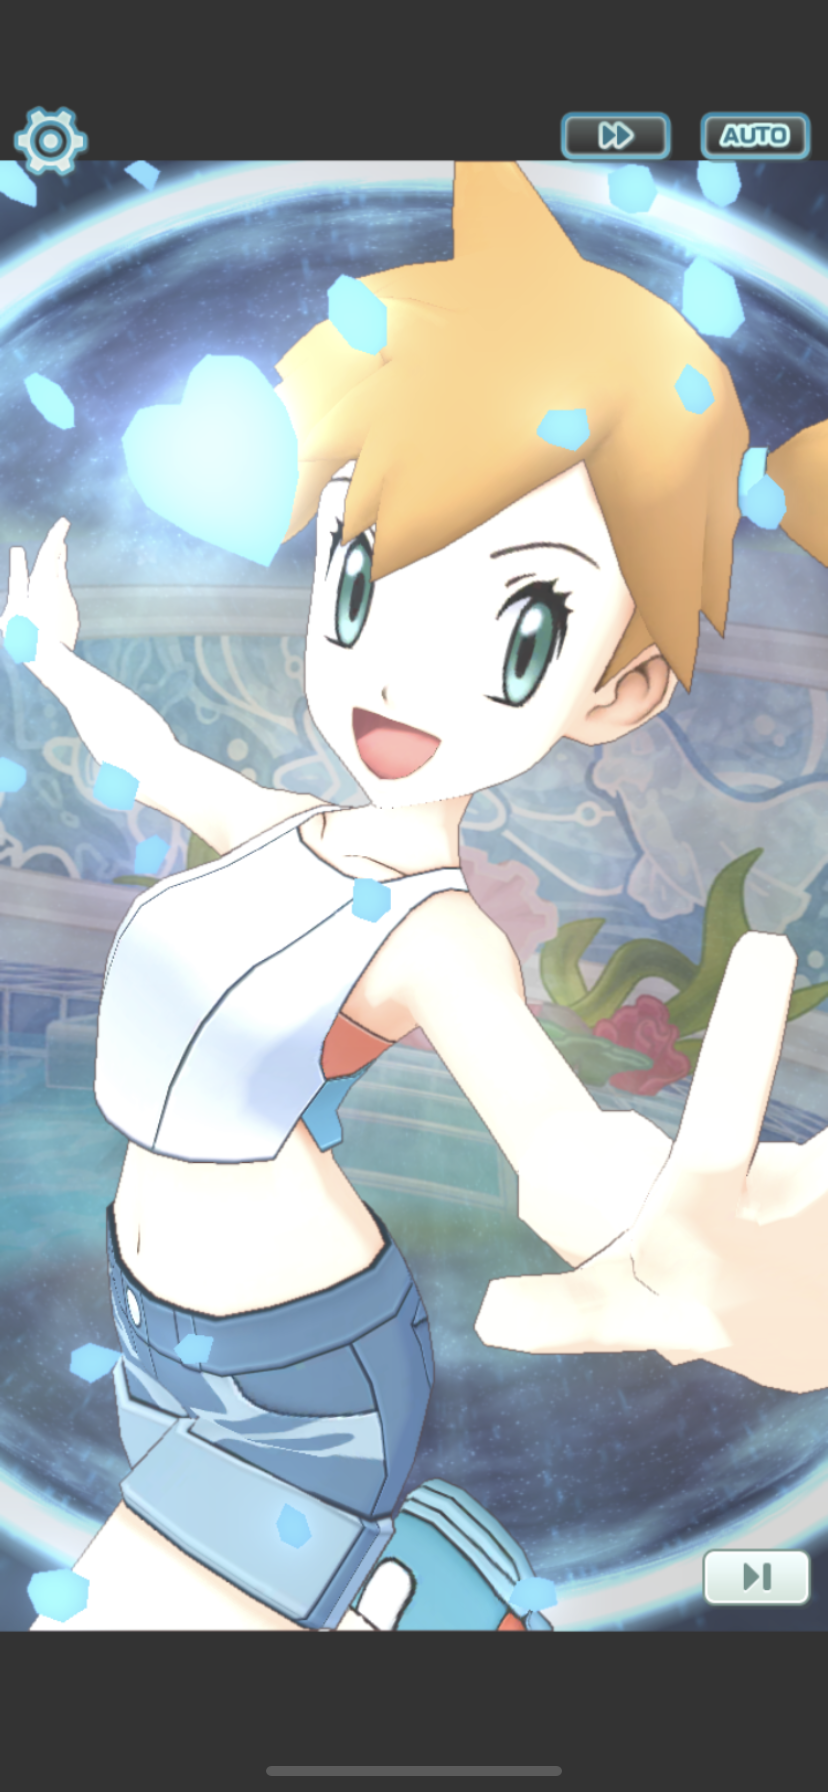 Misty performing her Sync Attack, or in other words, her special move.